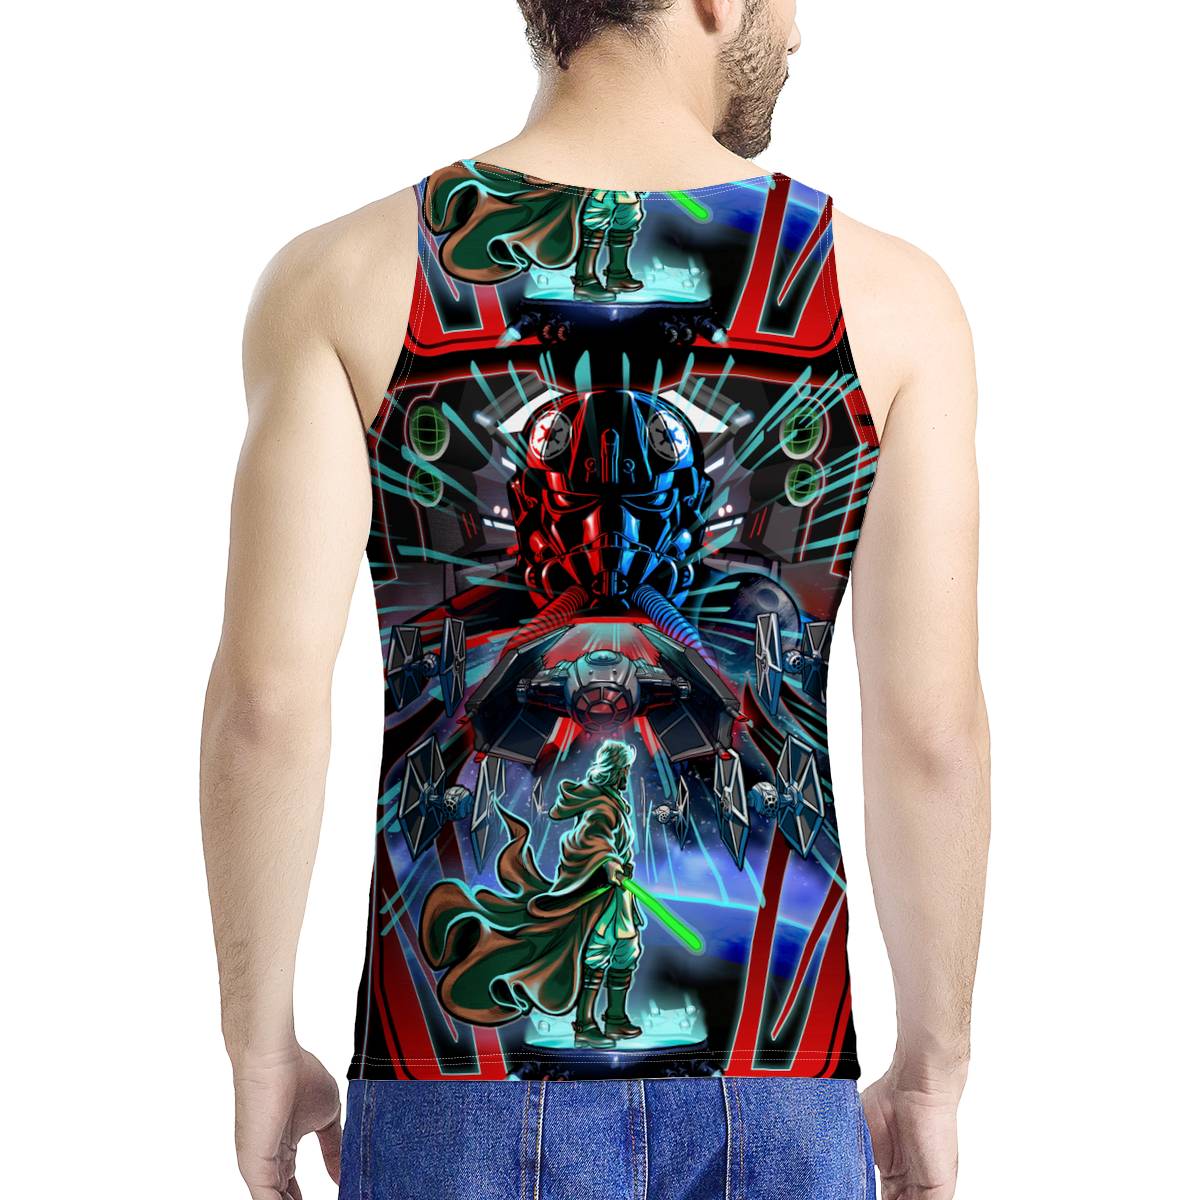 -- RBE-001 -- All-Over Print Vest --